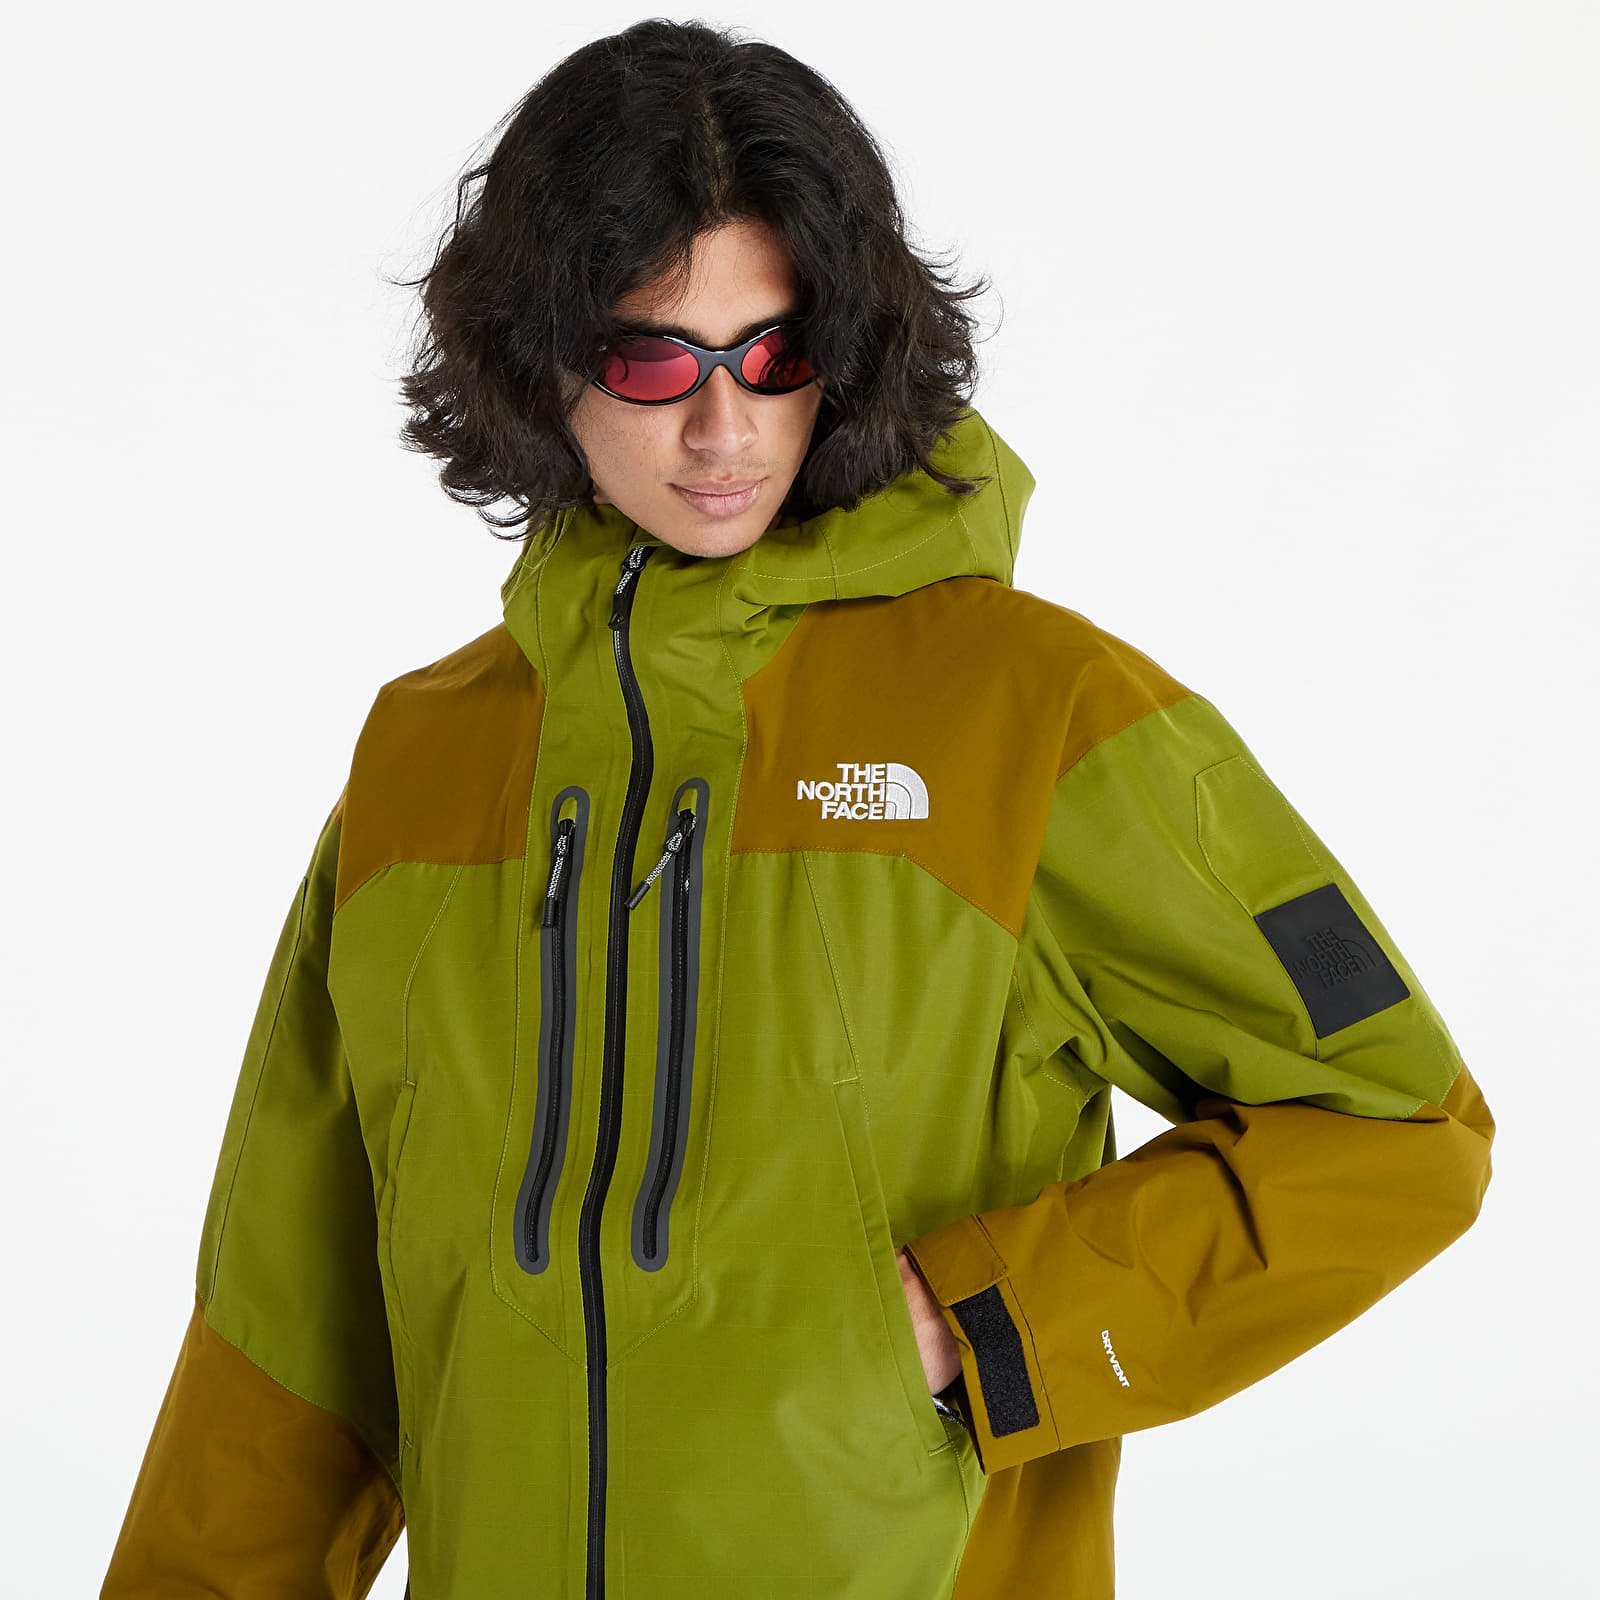 The North Face DRT Collection - Proper Magazine